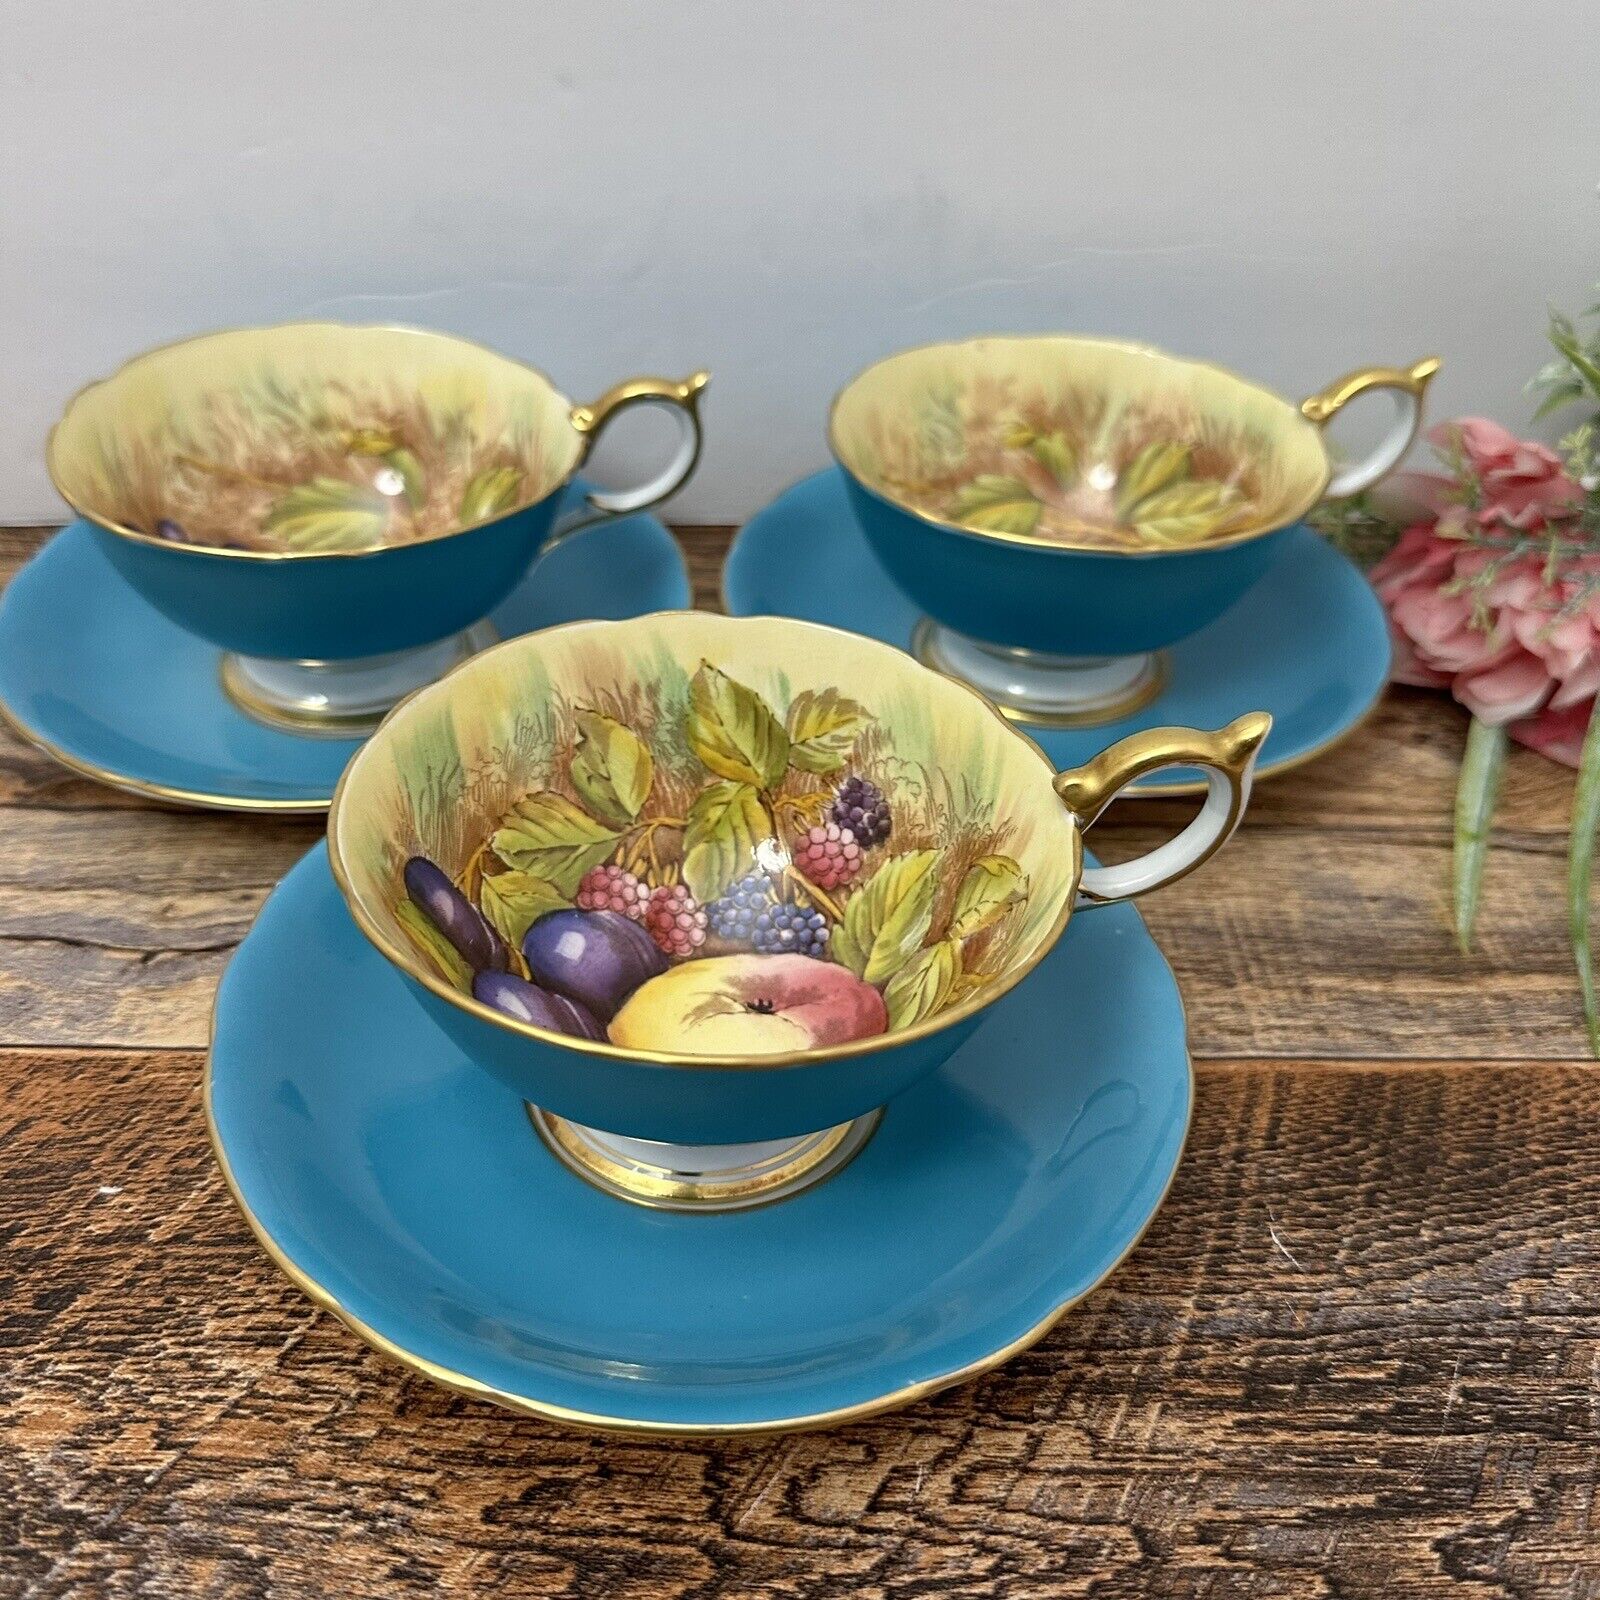 Aynsley England - Gold Border Fruit Turquoise Tea Set - 3 Cups and 3 Saucers